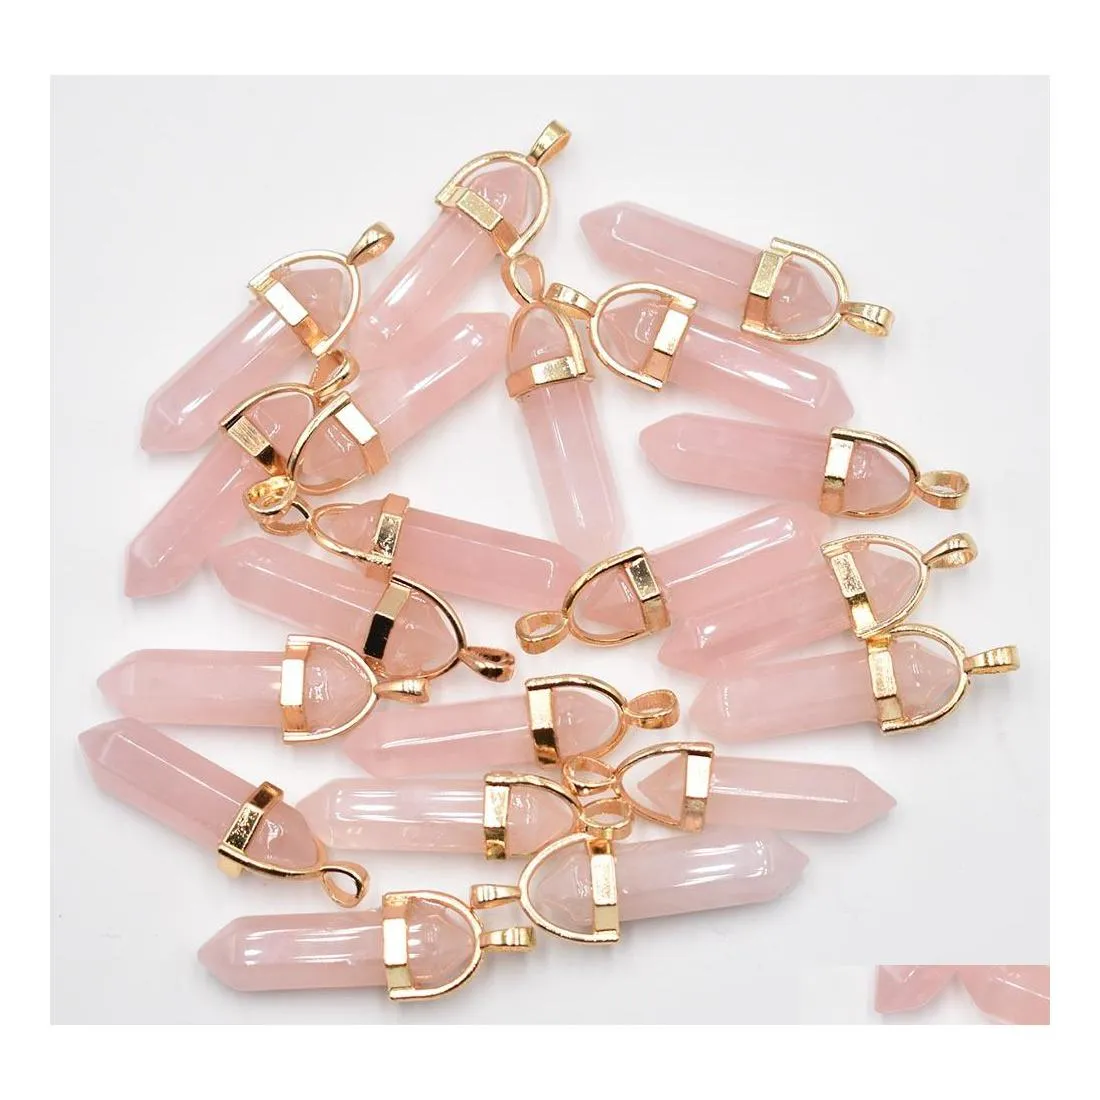 Charms Natural Stone Rose Quartz Amethyst Opal Shape Point Chakra Pendants For Smyckeshalsband￶rh￤ngen som g￶r Drop Delivery Findin Dhtar